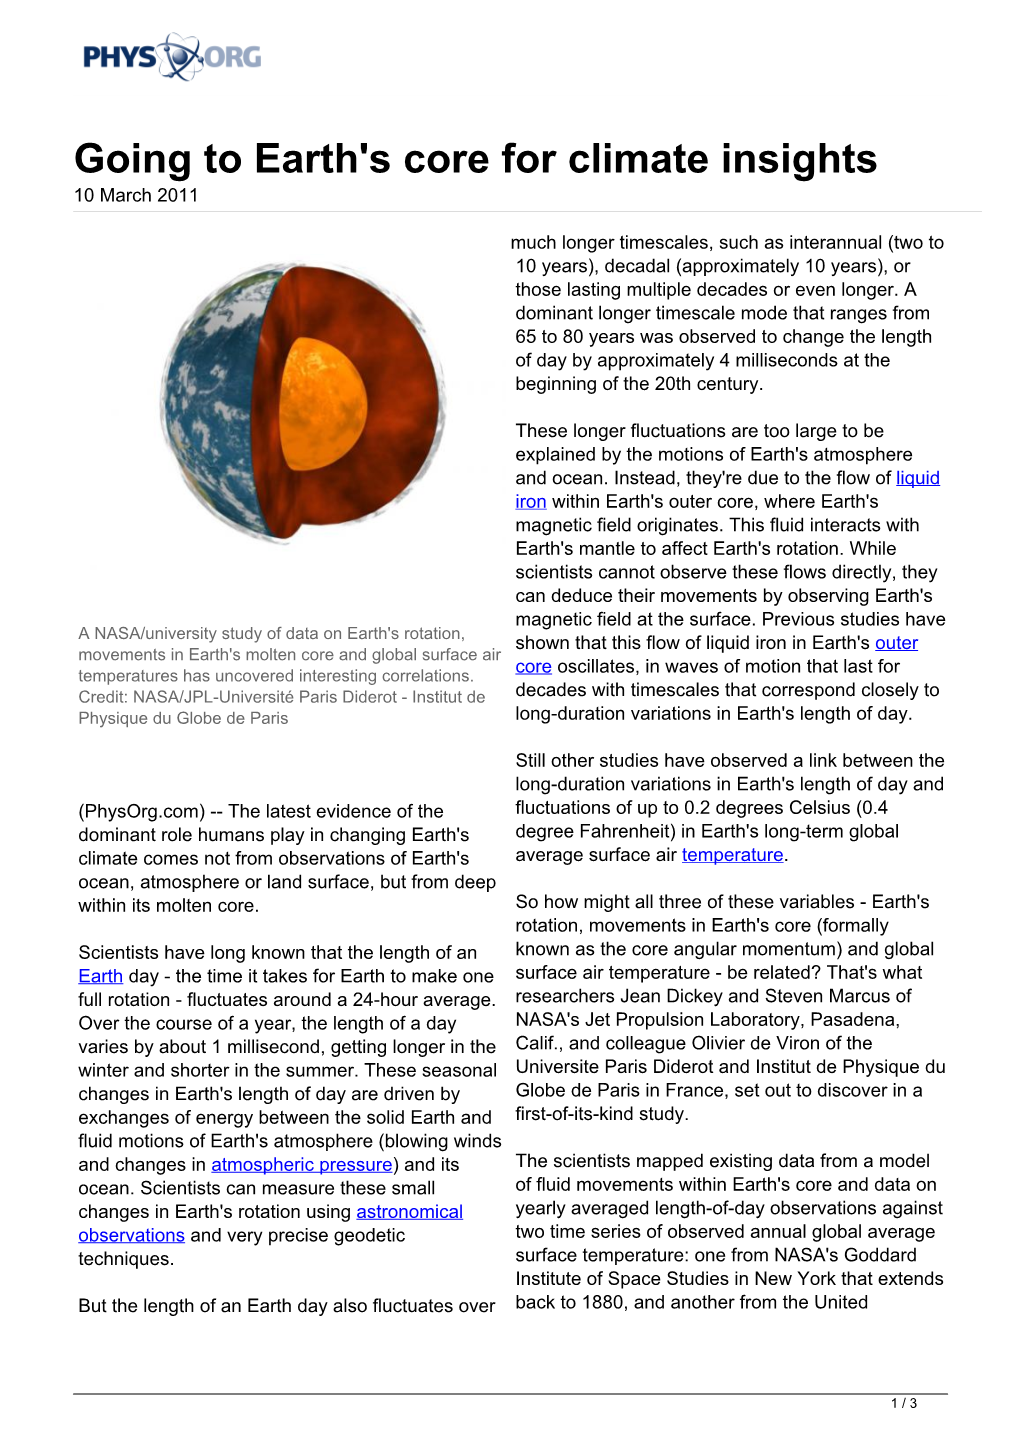 Going to Earth's Core for Climate Insights 10 March 2011